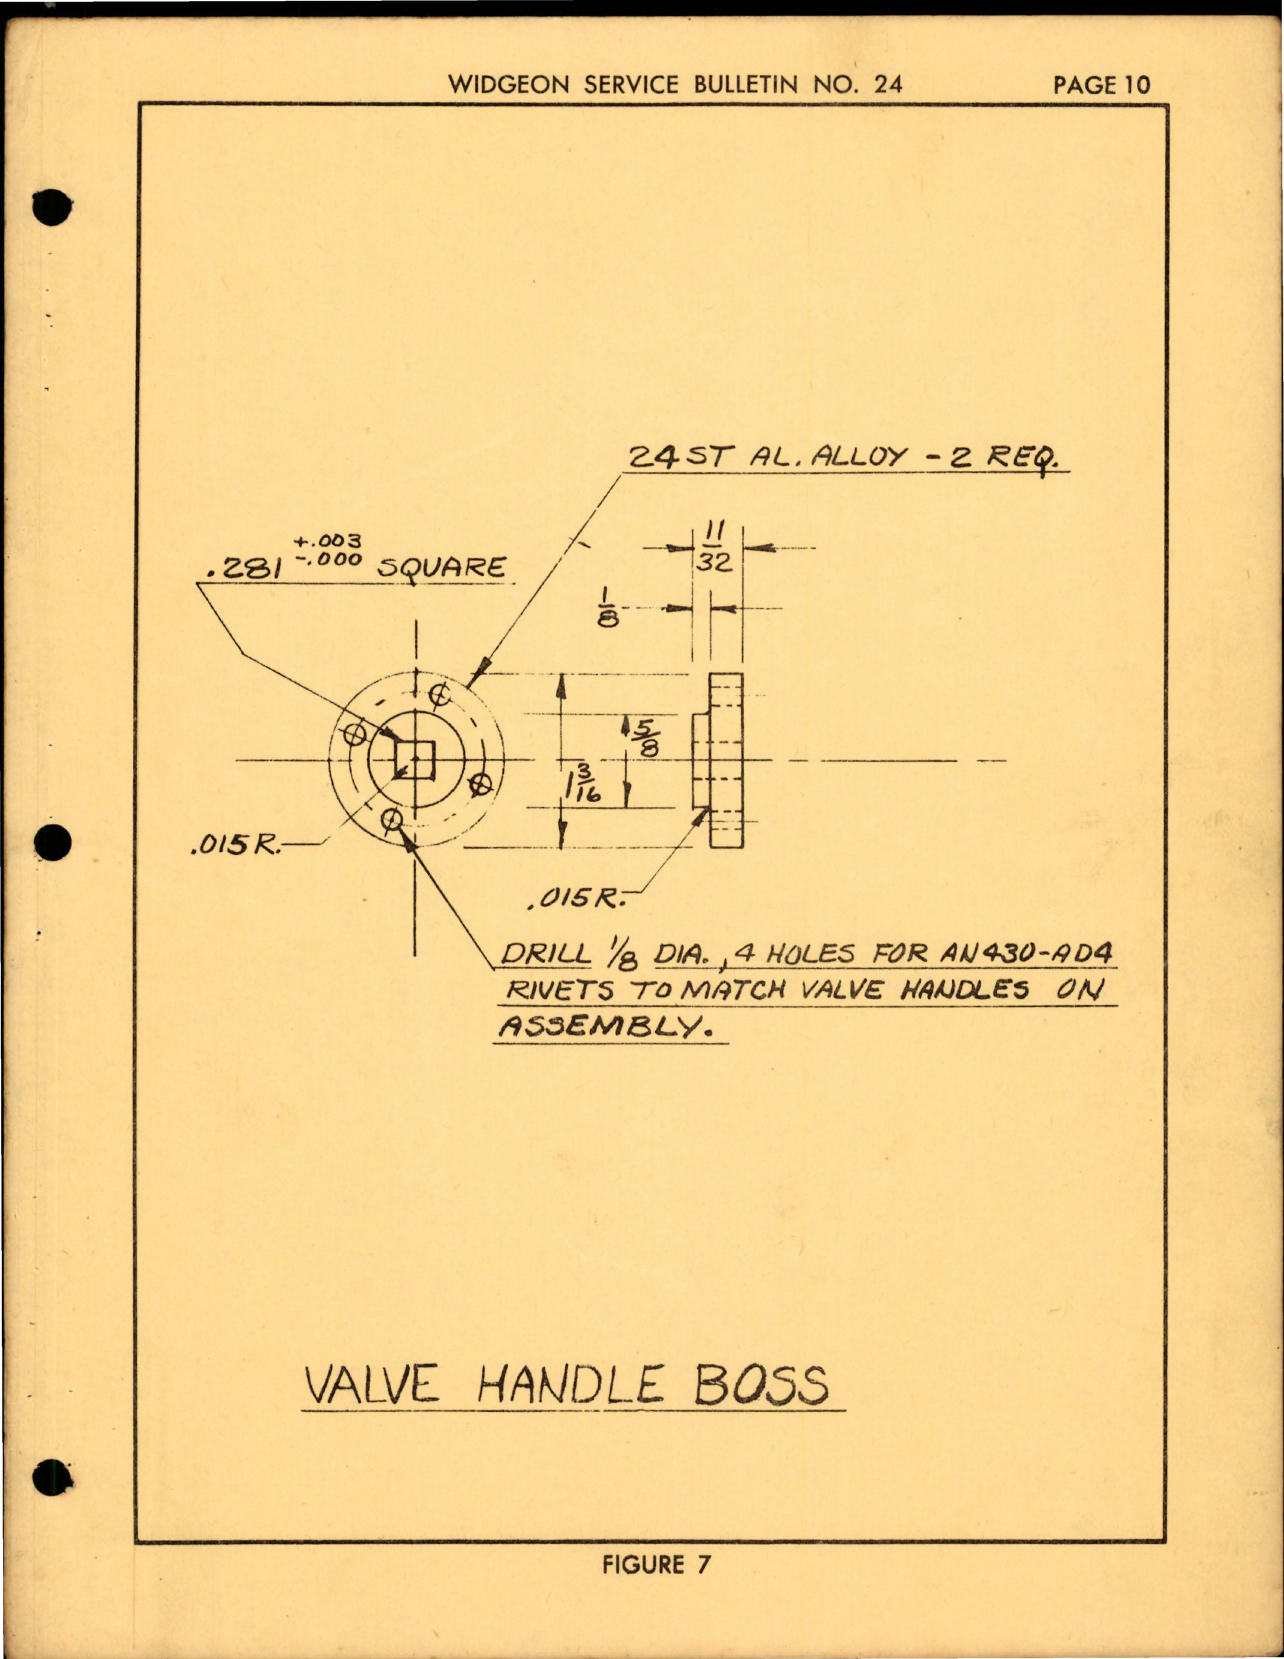 Sample page 9 from AirCorps Library document: Revision of Widgeon Hydraulic System